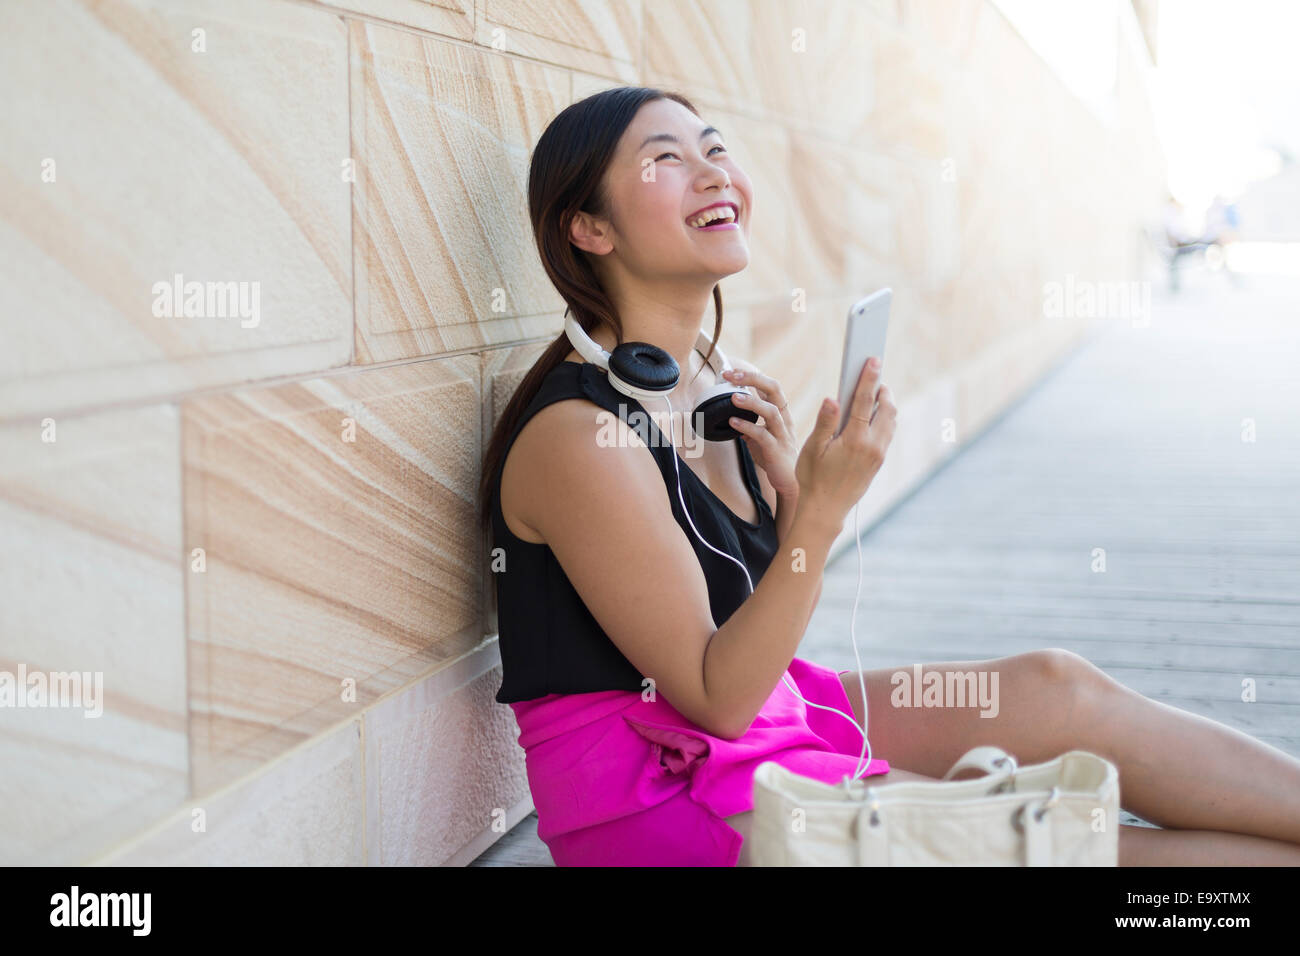 A young woman relaxing using a smartphone with headphones Stock Photo